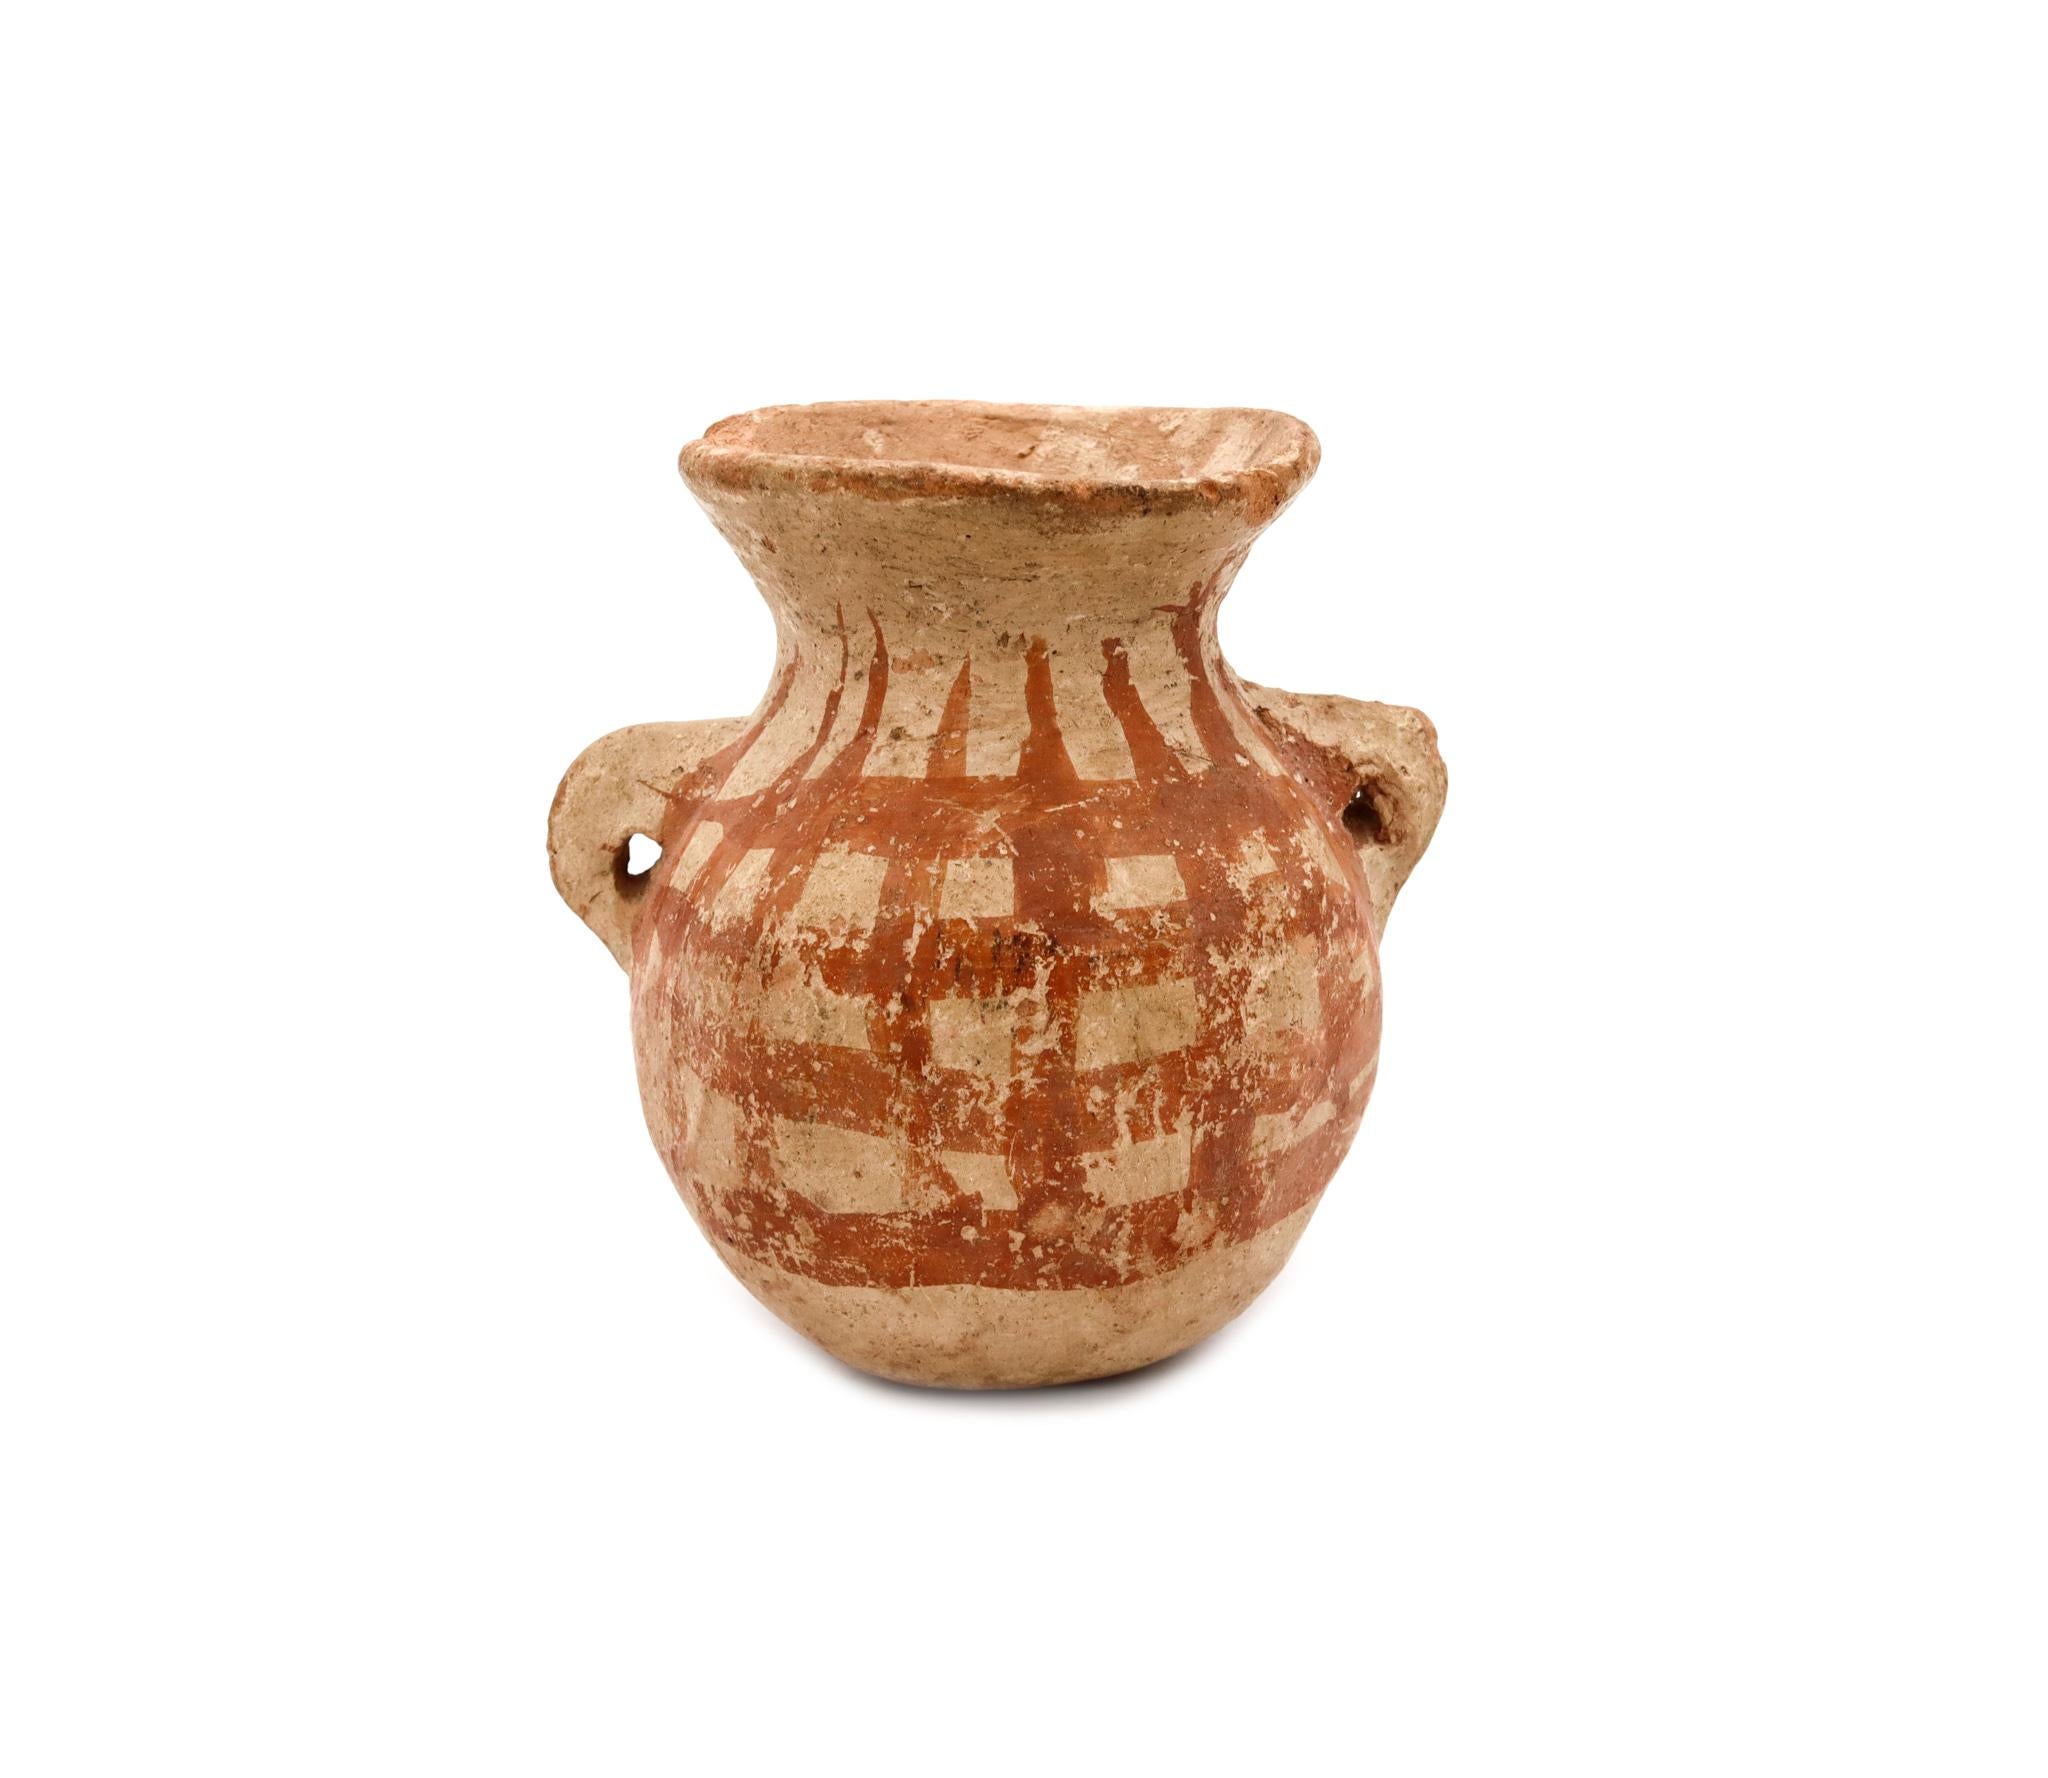 A pre-Inca Chimu culture, pre Columbian vase in earth ware.

This beautiful little vessel vase, was created in the northern Peruvian region by the Chimu culture between the 900 / 1470 AD. Is a nice early vase modeled from earth ware with two